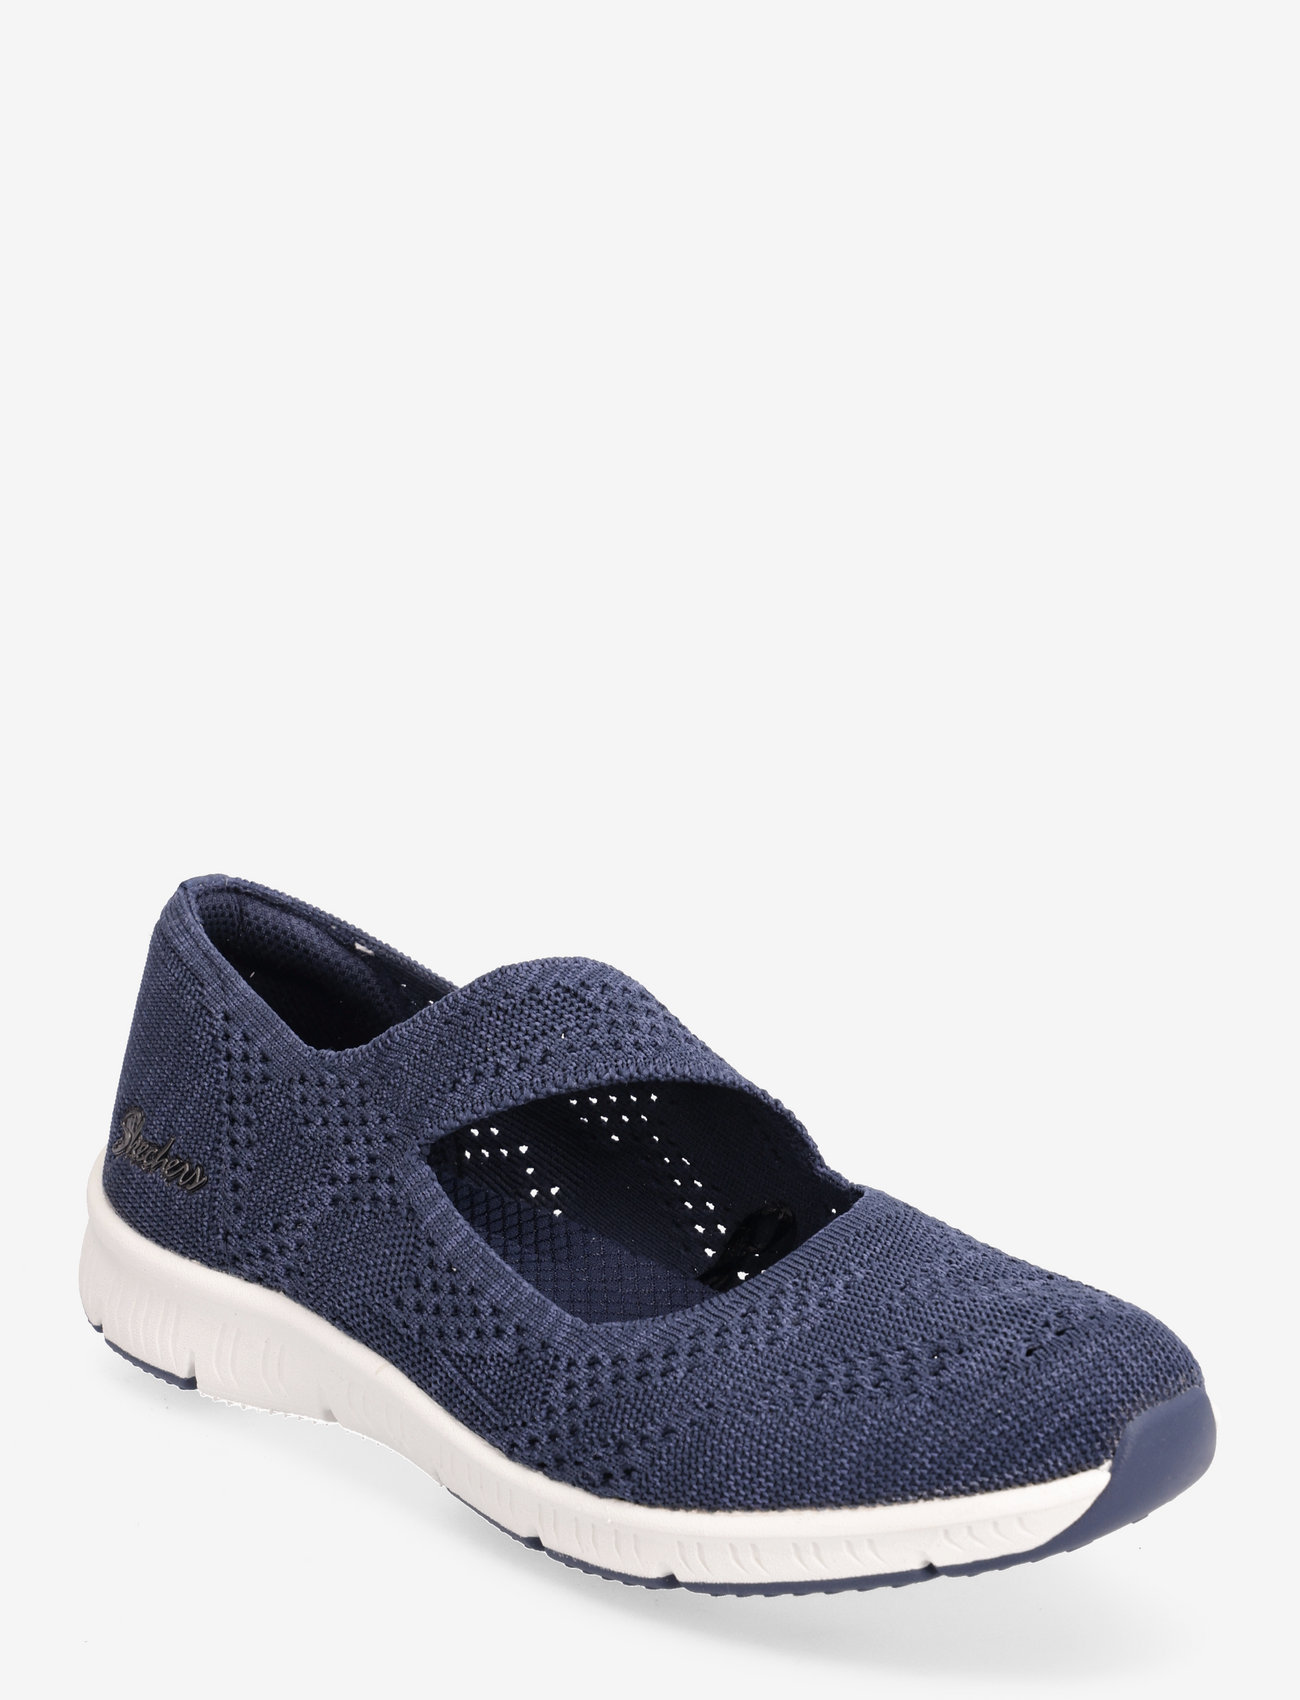 Skechers - Womens Be-Cool Endless Fun - peoriided outlet-hindadega - nvy navy - 0